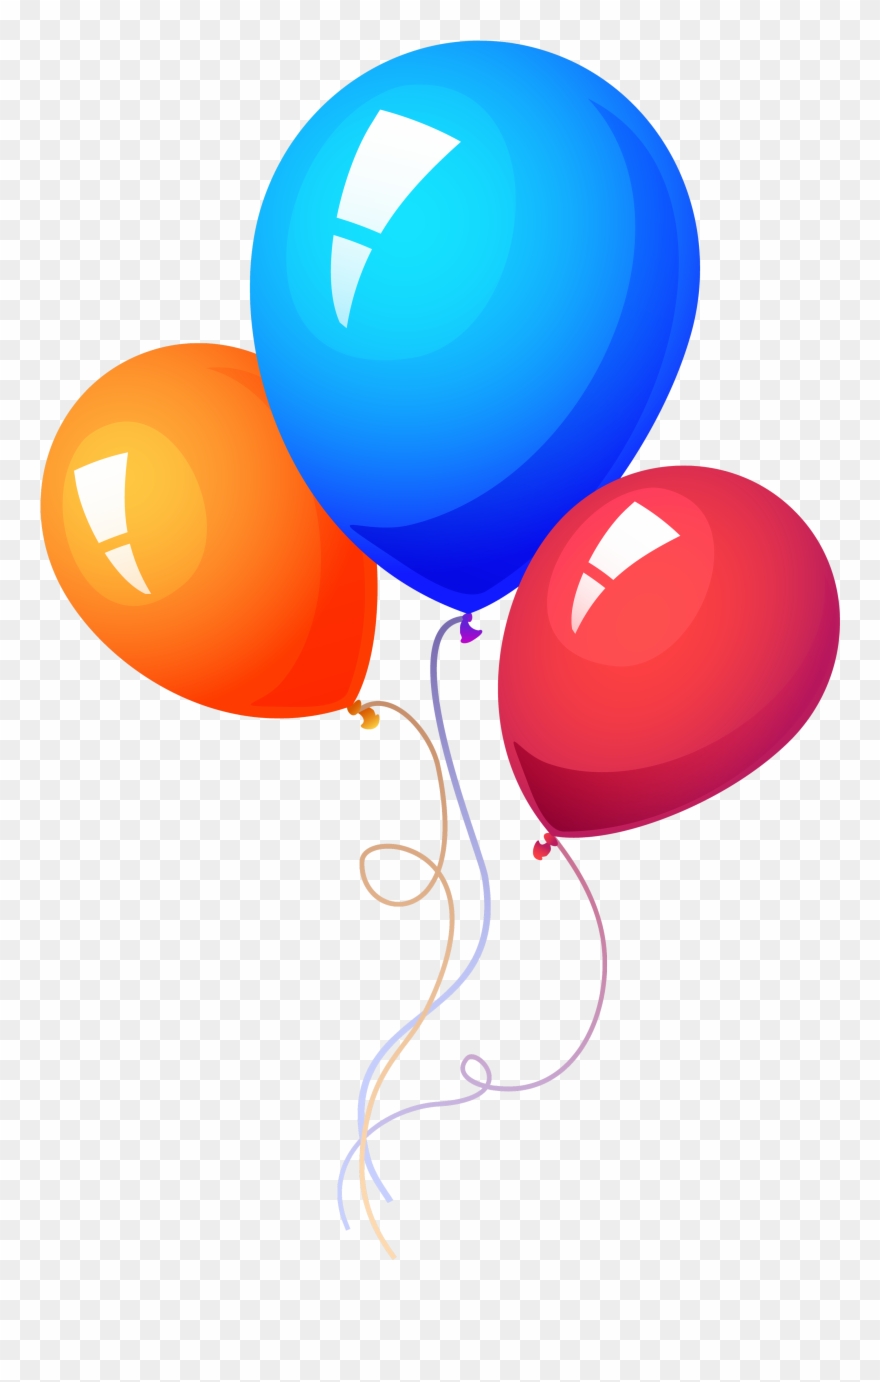 Balloon images png.